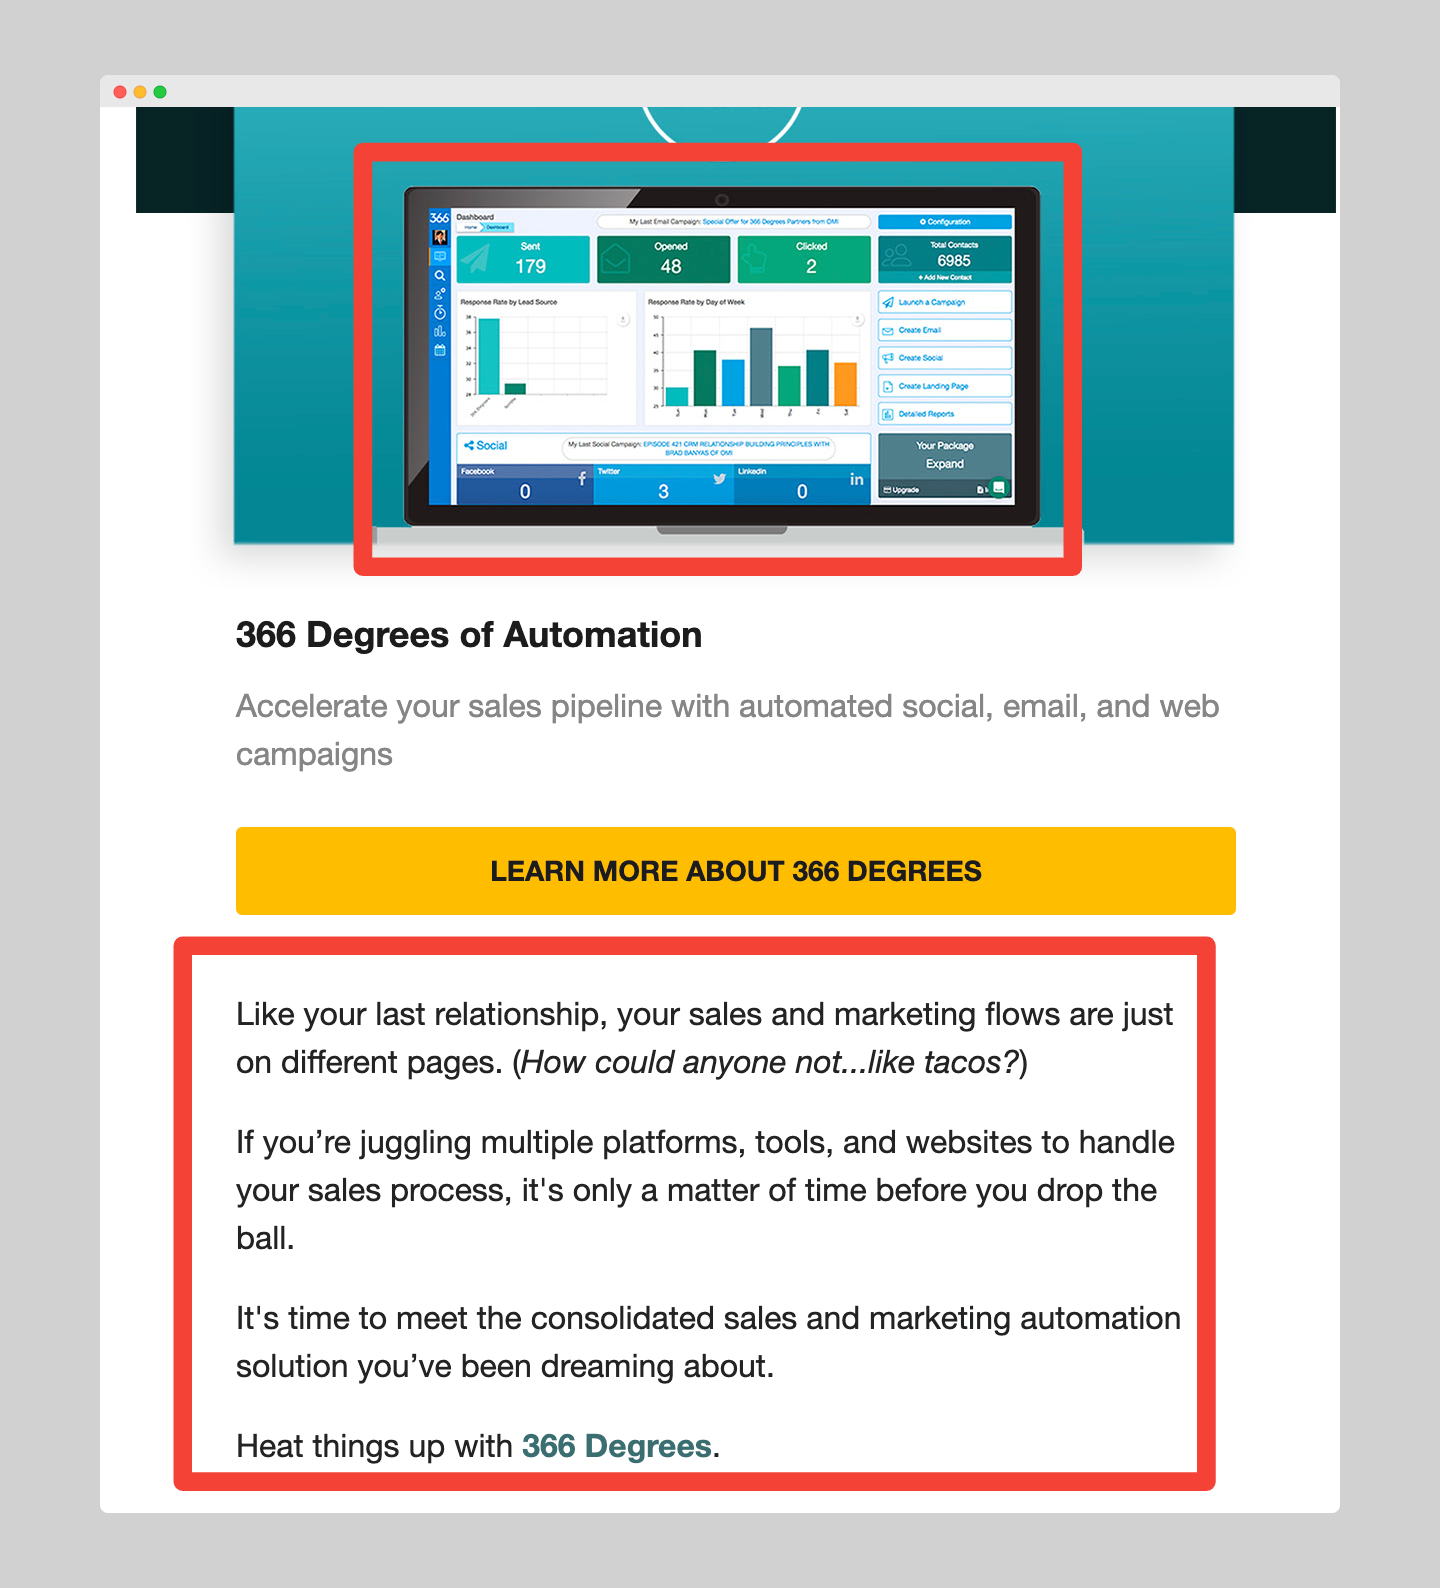 Email Marketing: AppSumo email example, show and tell